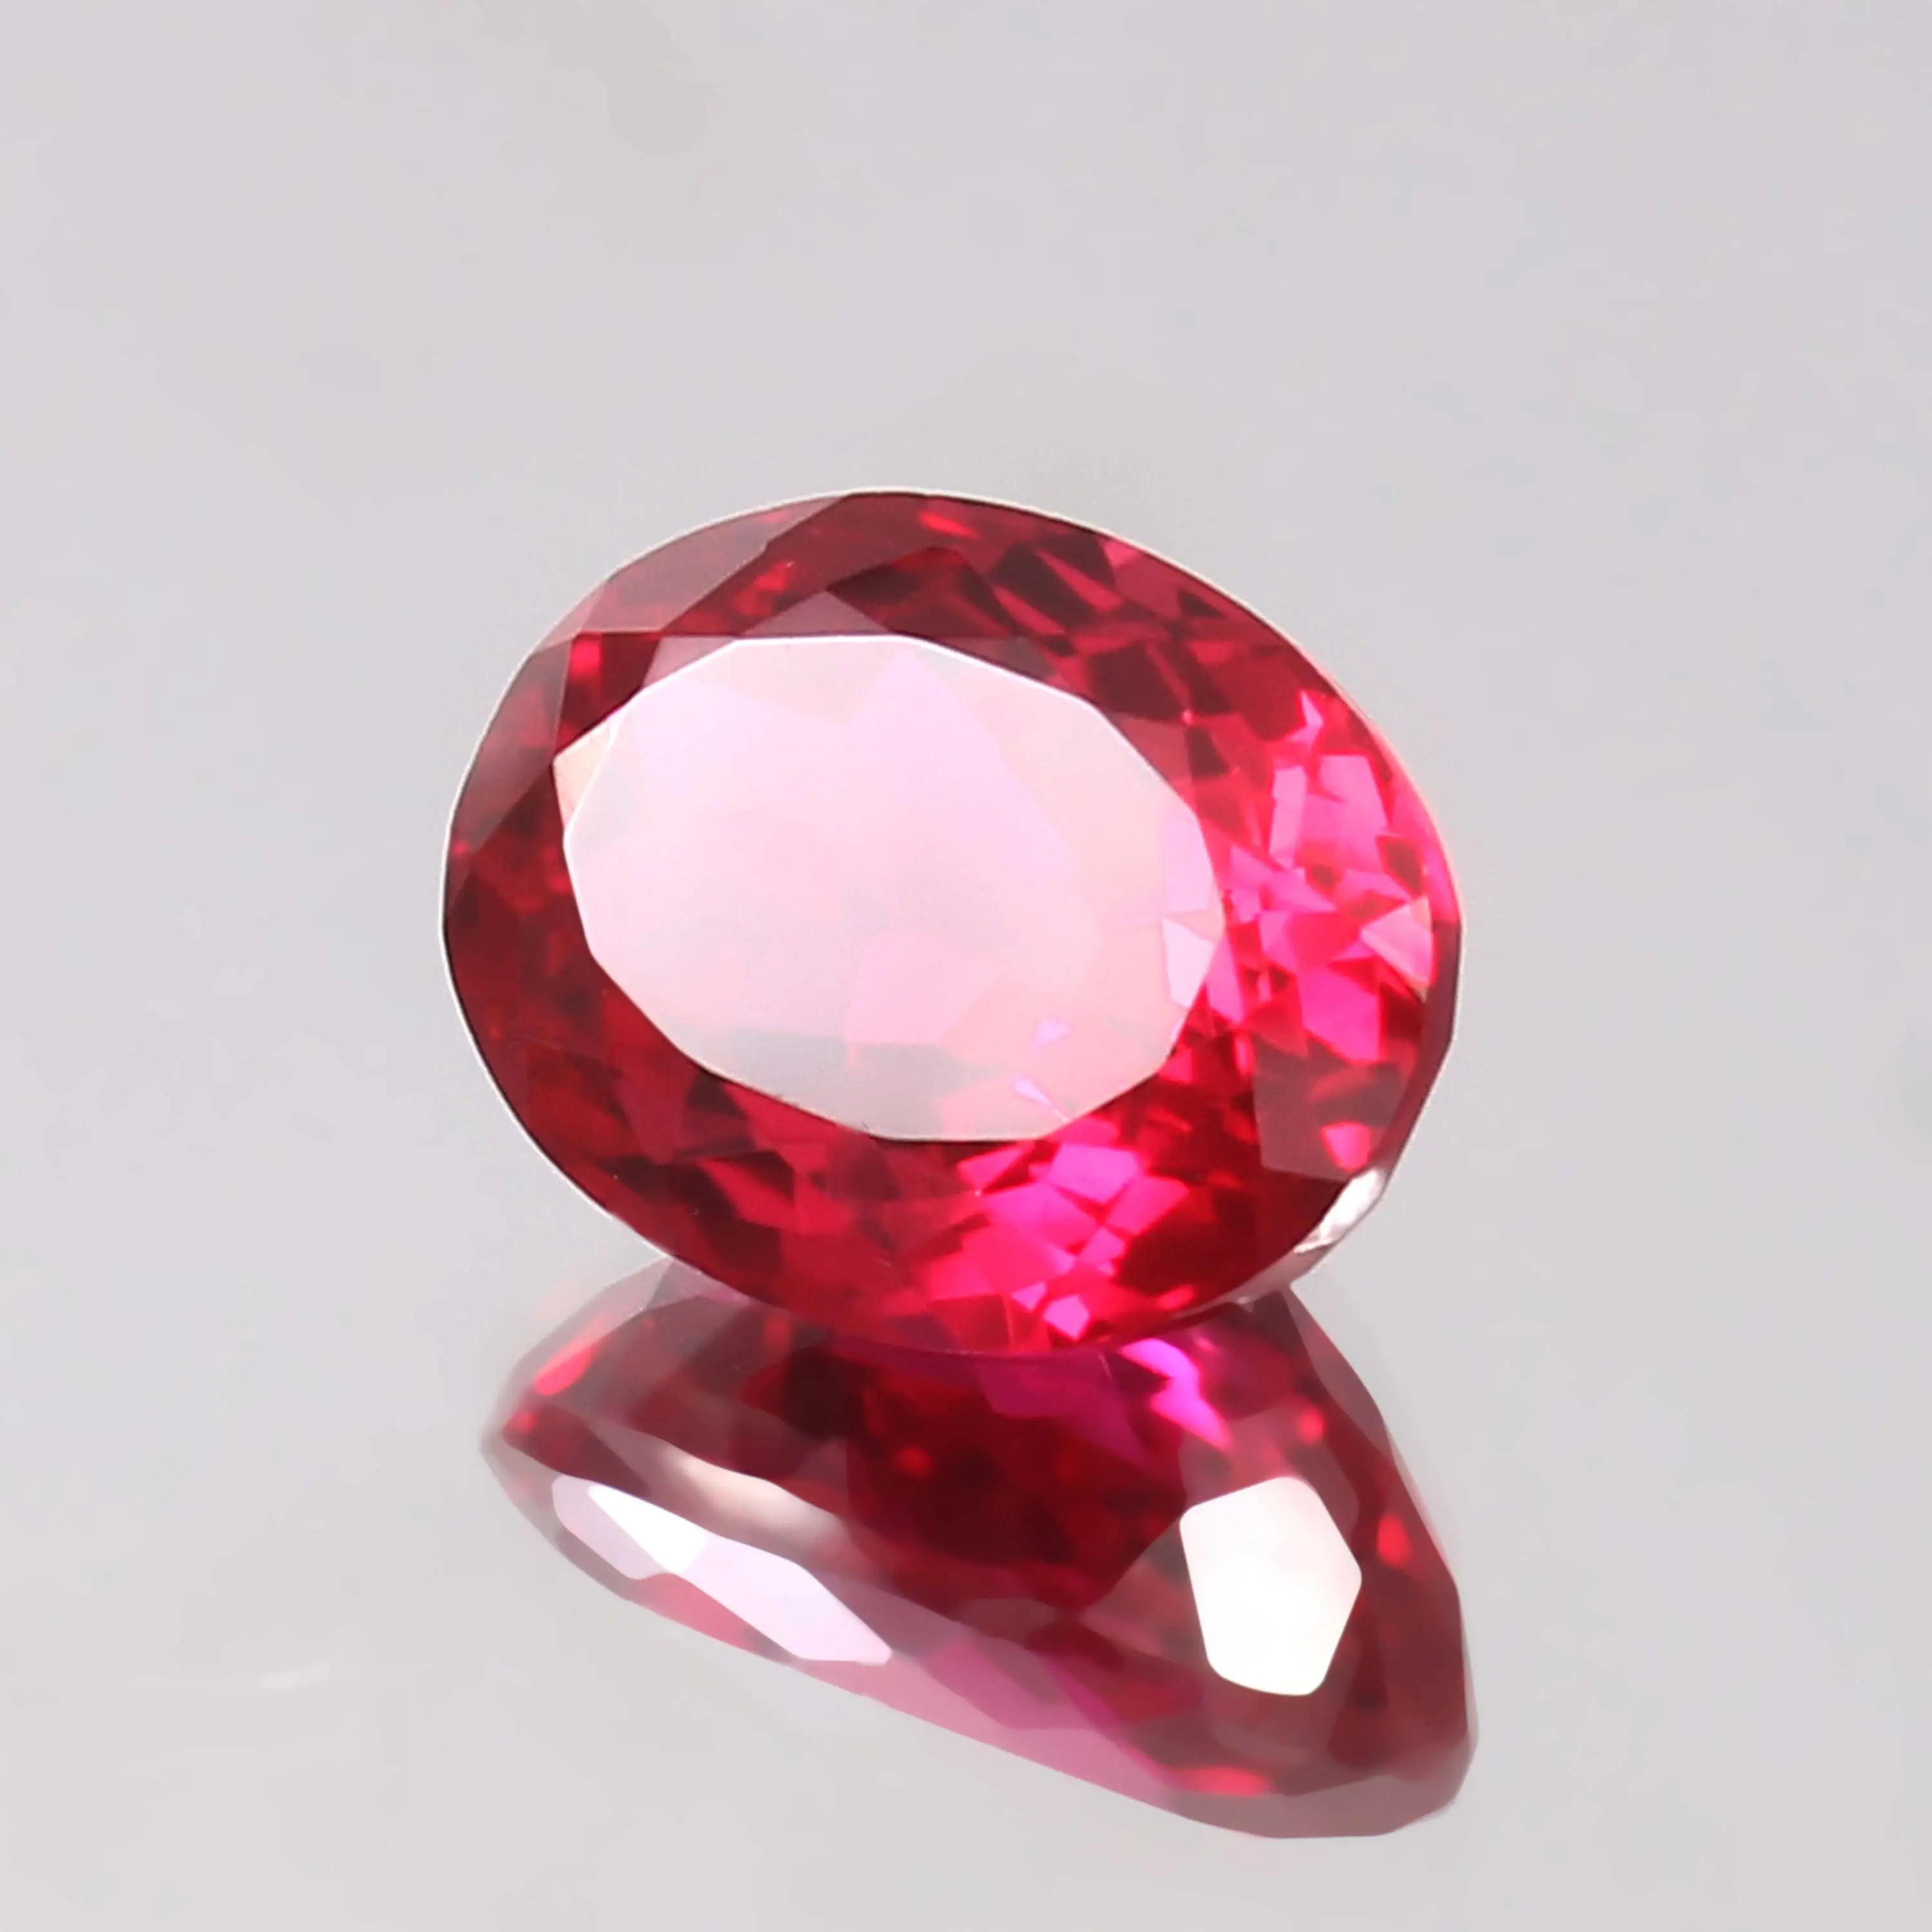 AAA Flawless Pegion Red Mozambique Ruby Loose Oval Cut Gemstone Brilliant Cut Gemstone Ring and Jewelry Making